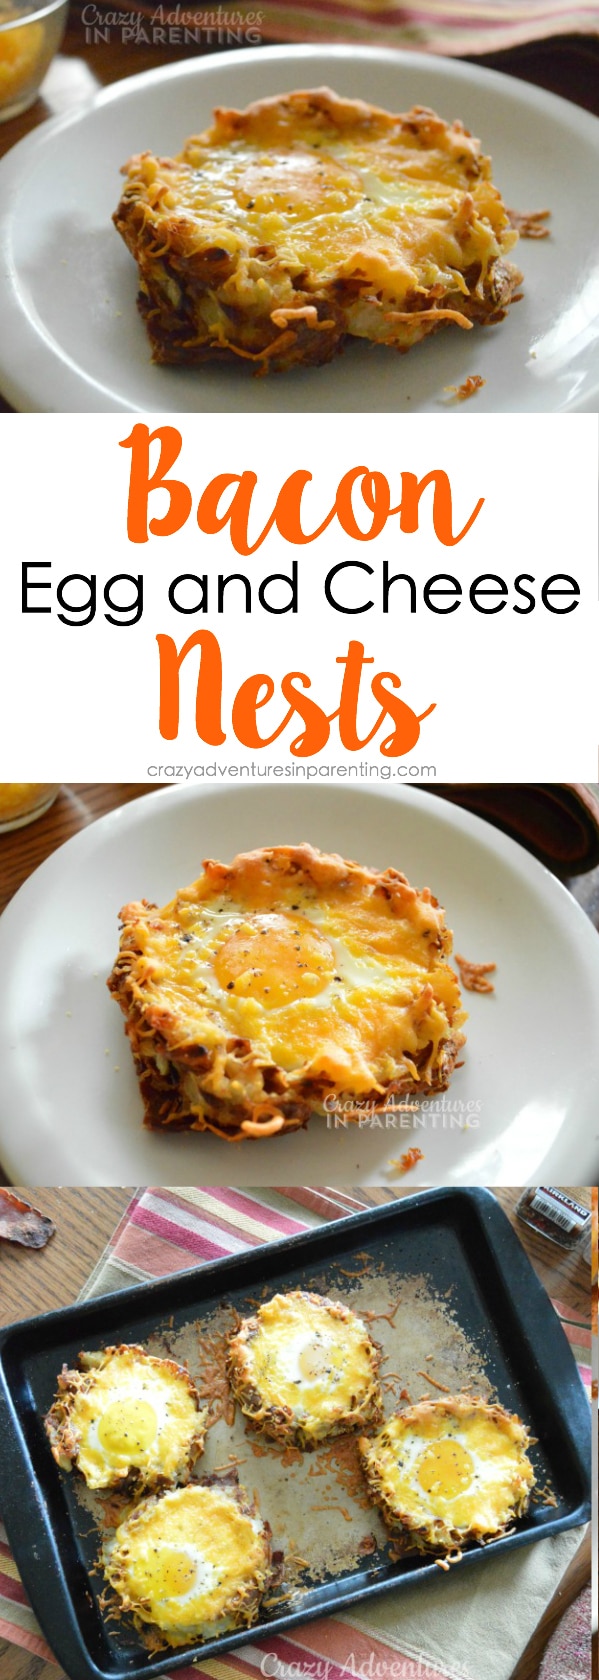 Bacon Egg and Cheese Nests